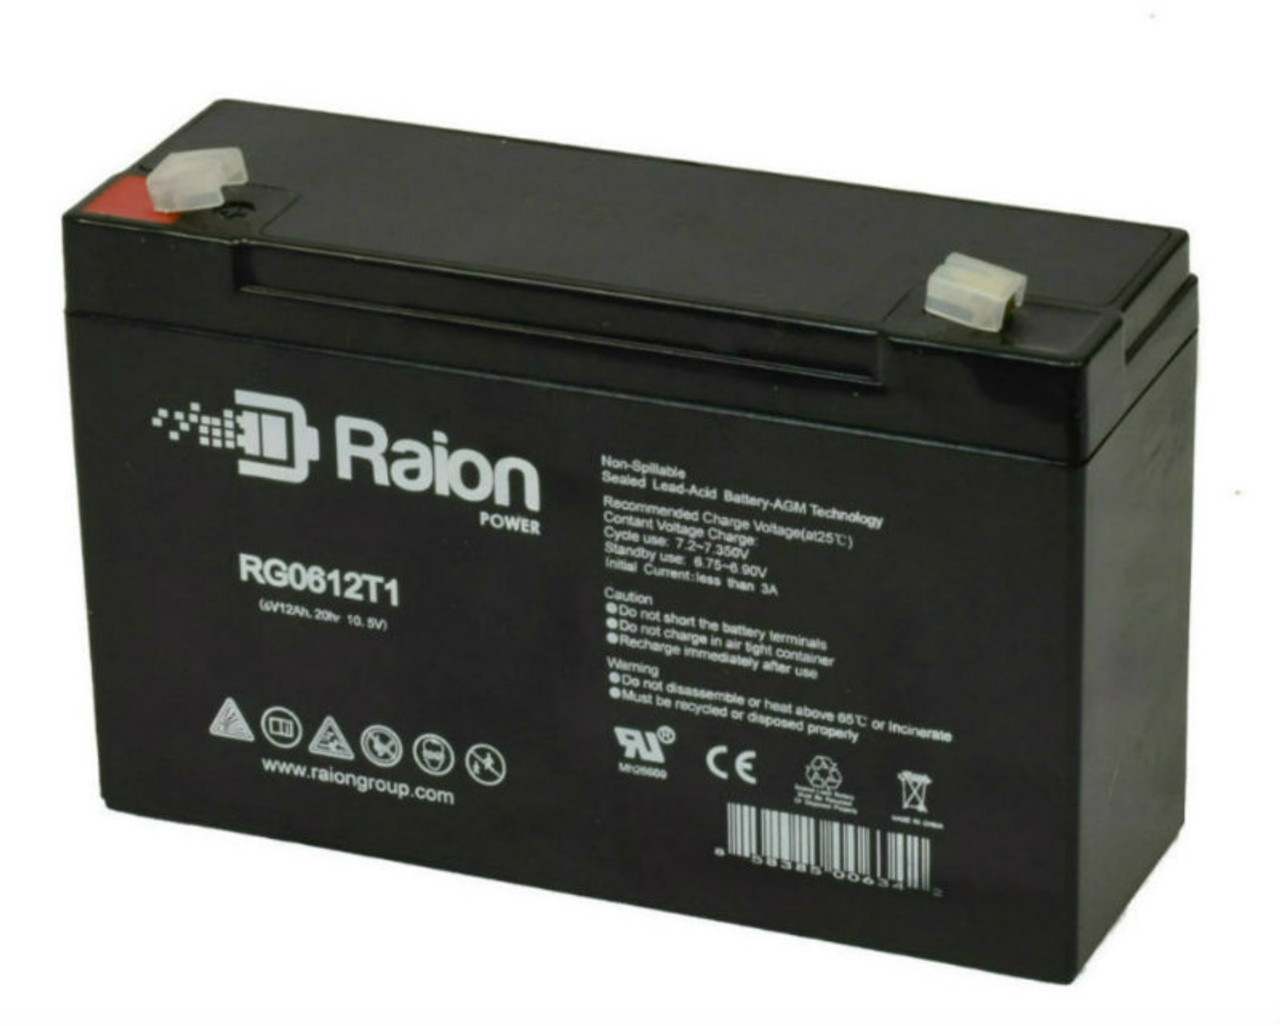 Raion Power RG06120T1 Replacement 6V 12Ah Emergency Light Battery for IBT BT10-6